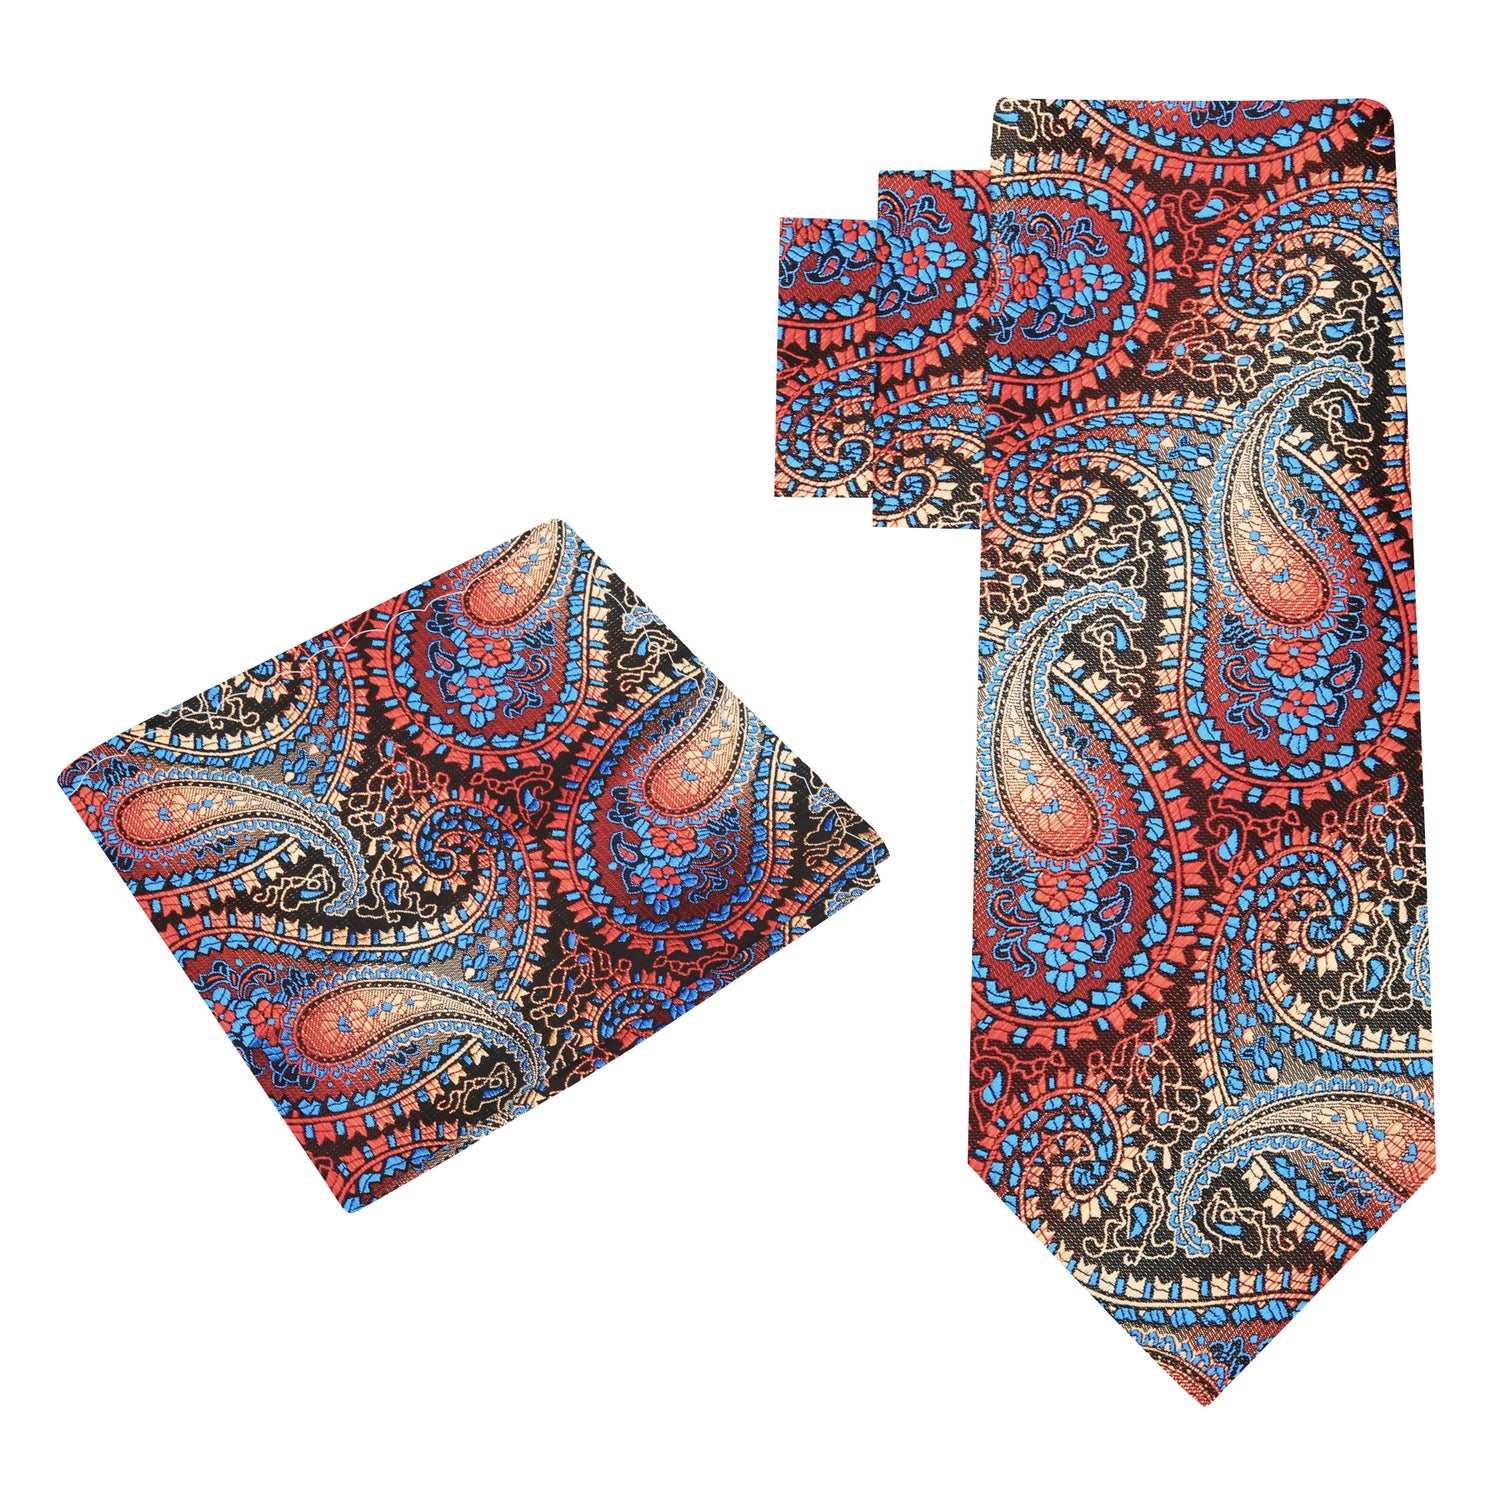 Alt View: Brown, Red, Orange, Light Blue Paisley Tie and Matching Pocket Square